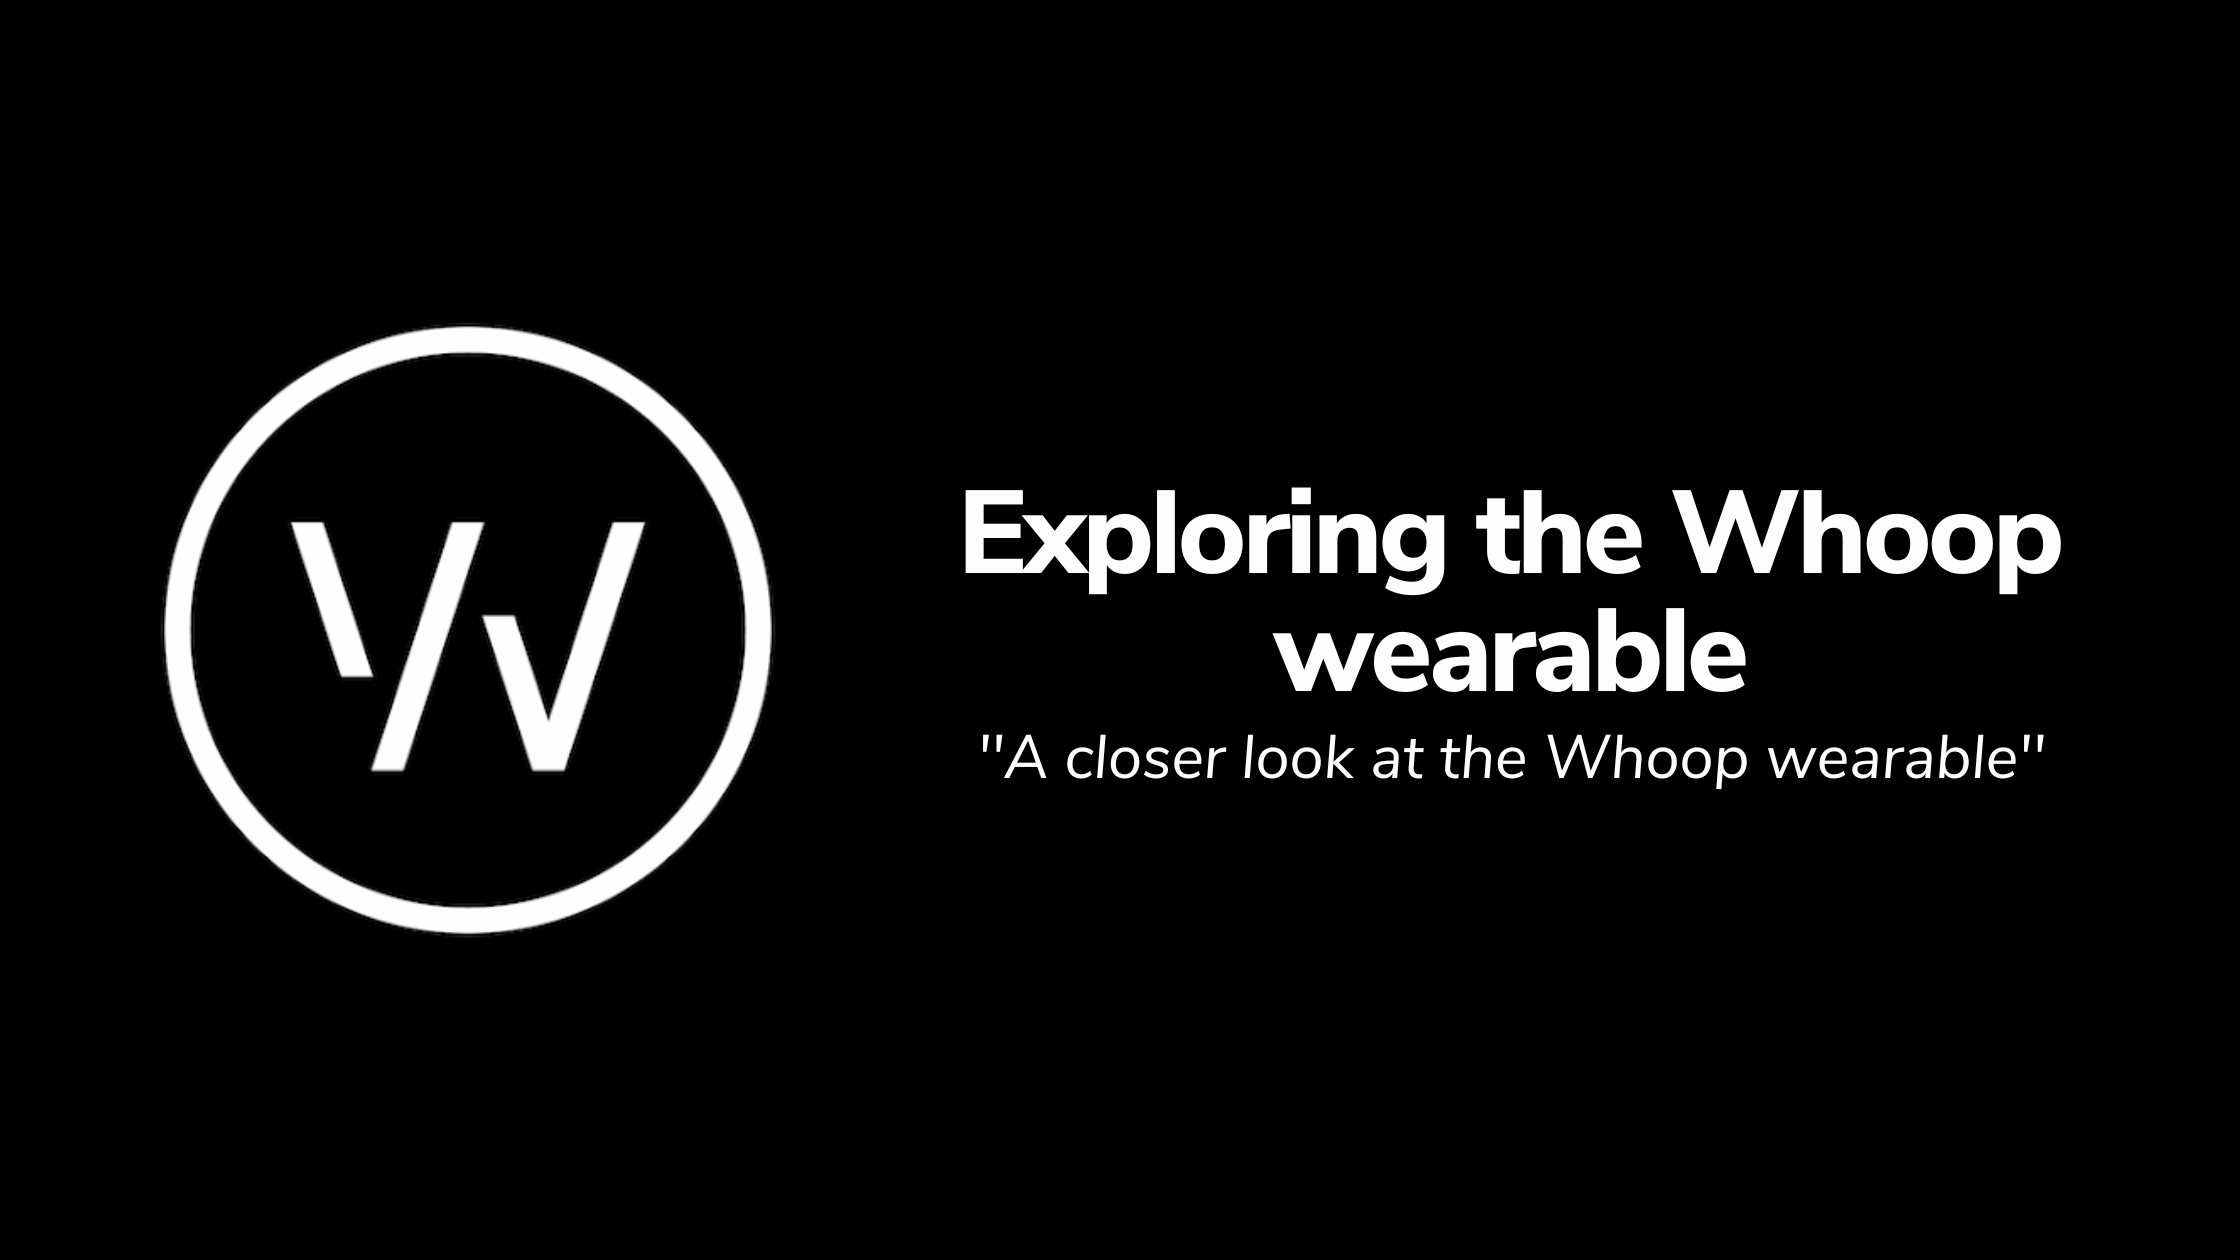 Exploring the Whoop wearable